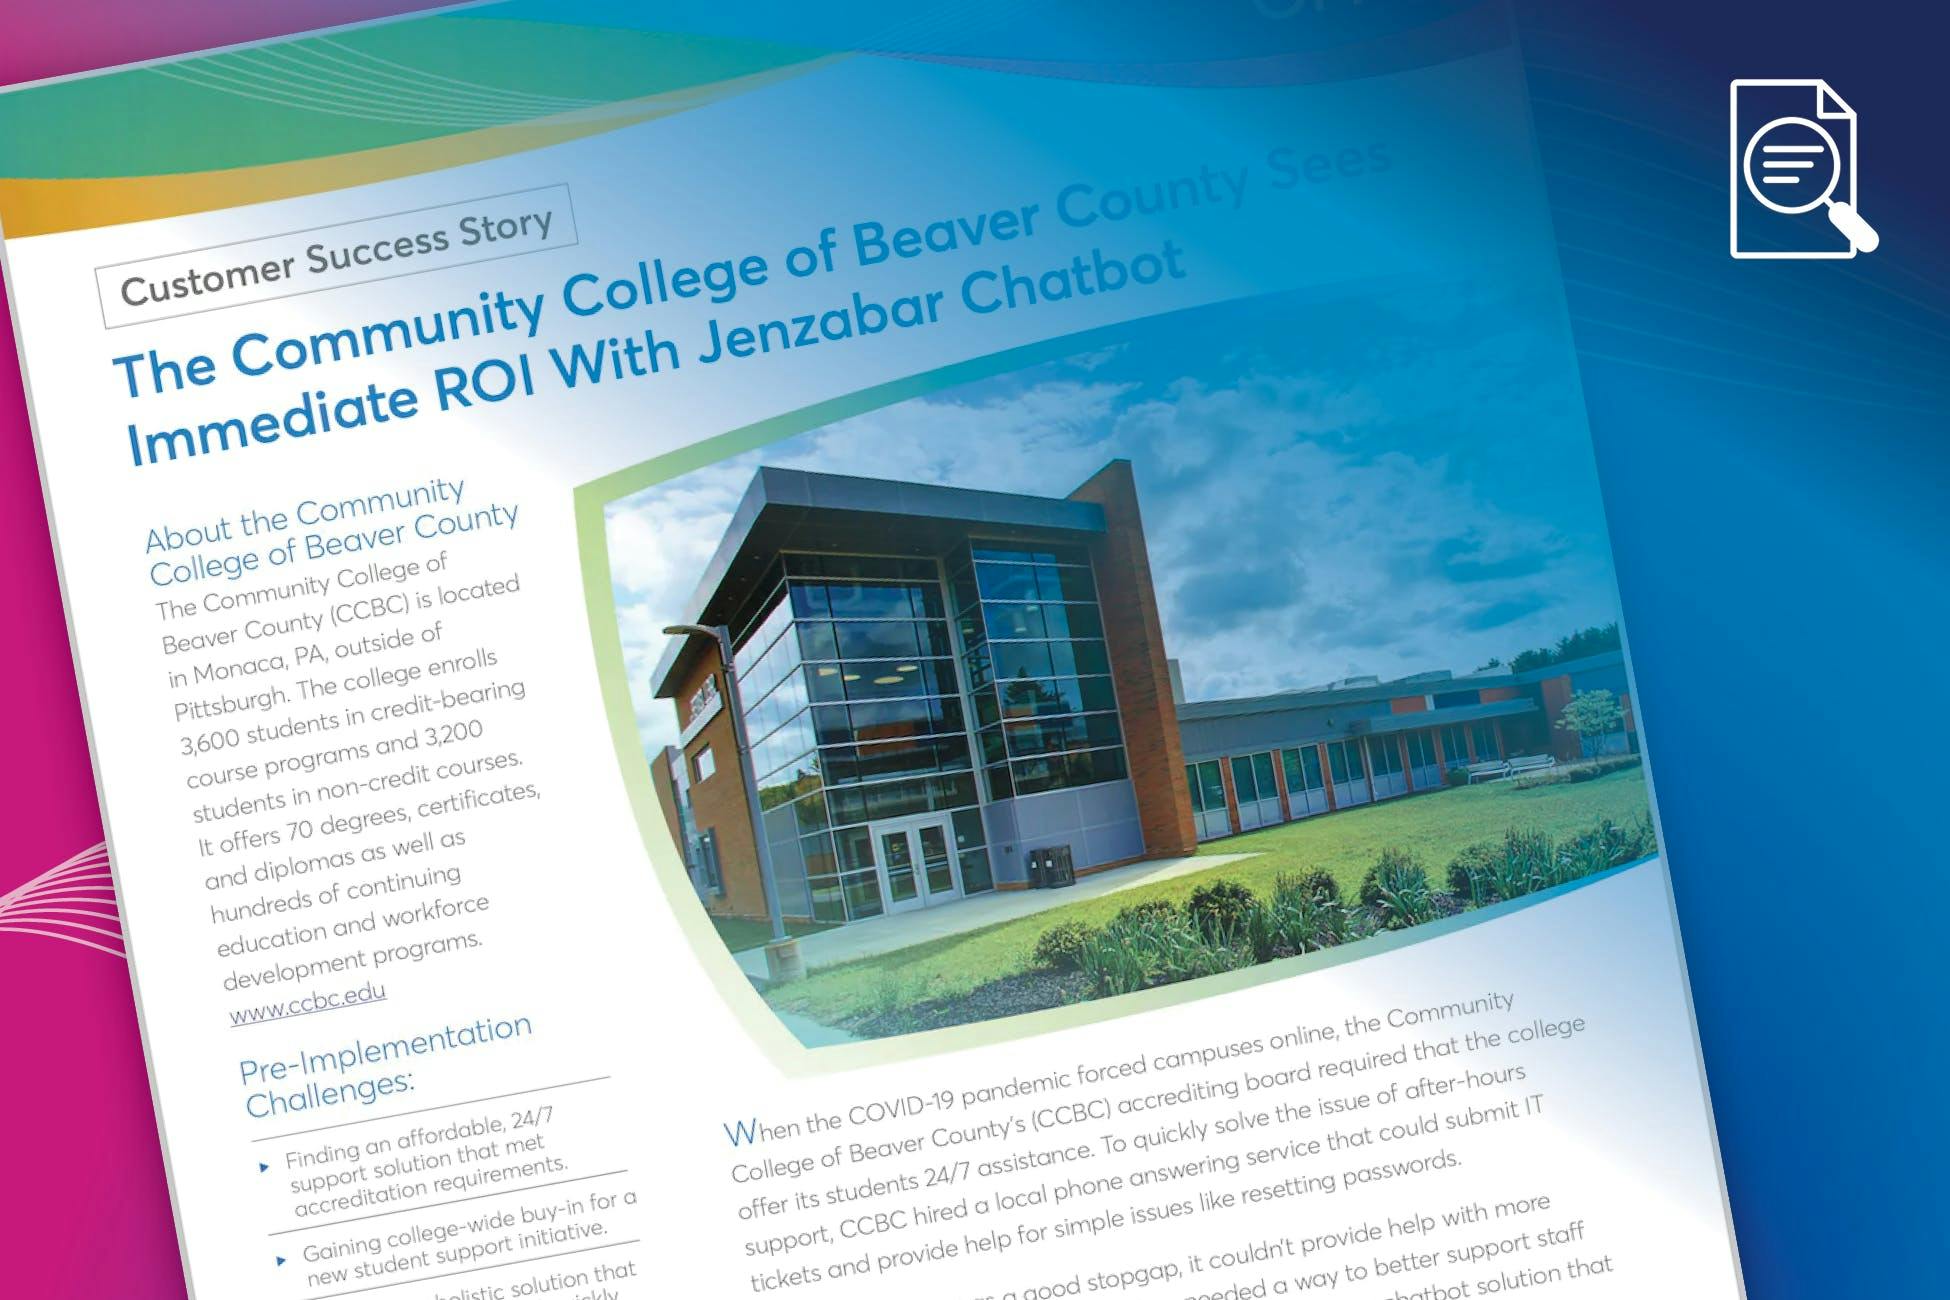 Case Study: The Community College of Beaver County Sees Immediate ROI With Jenzabar Chatbot